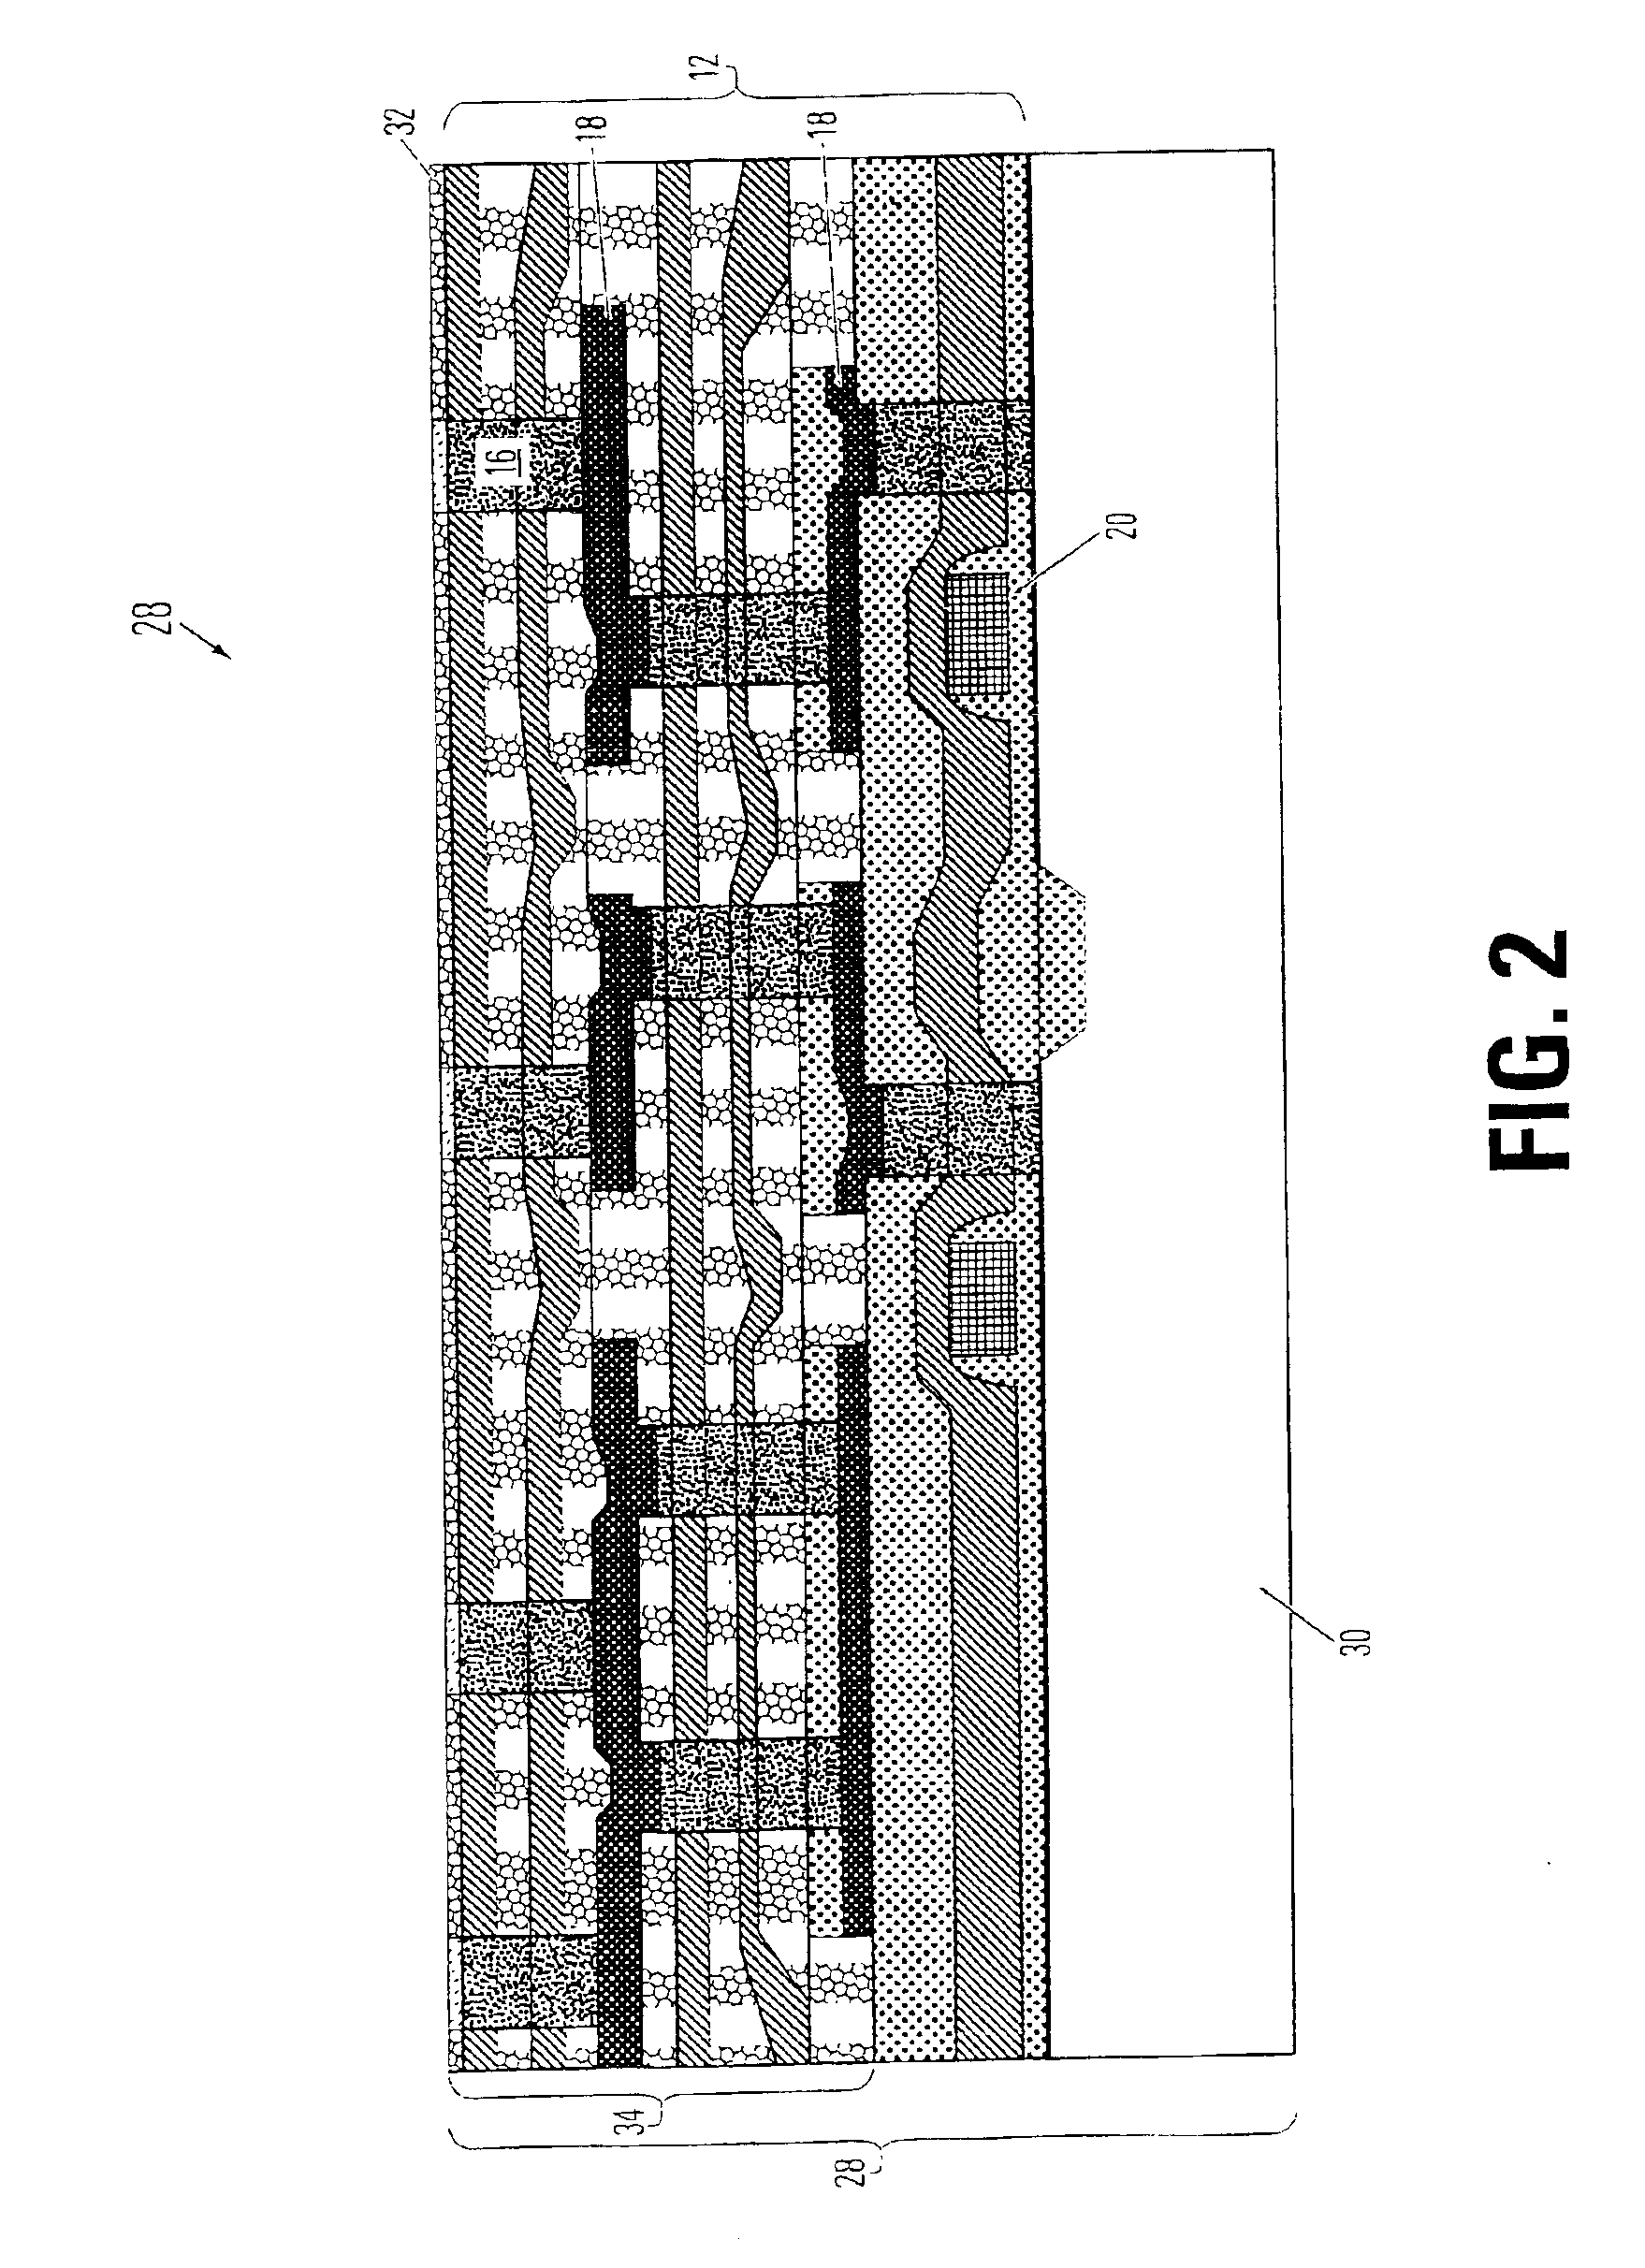 Ferroelectric device and method for making